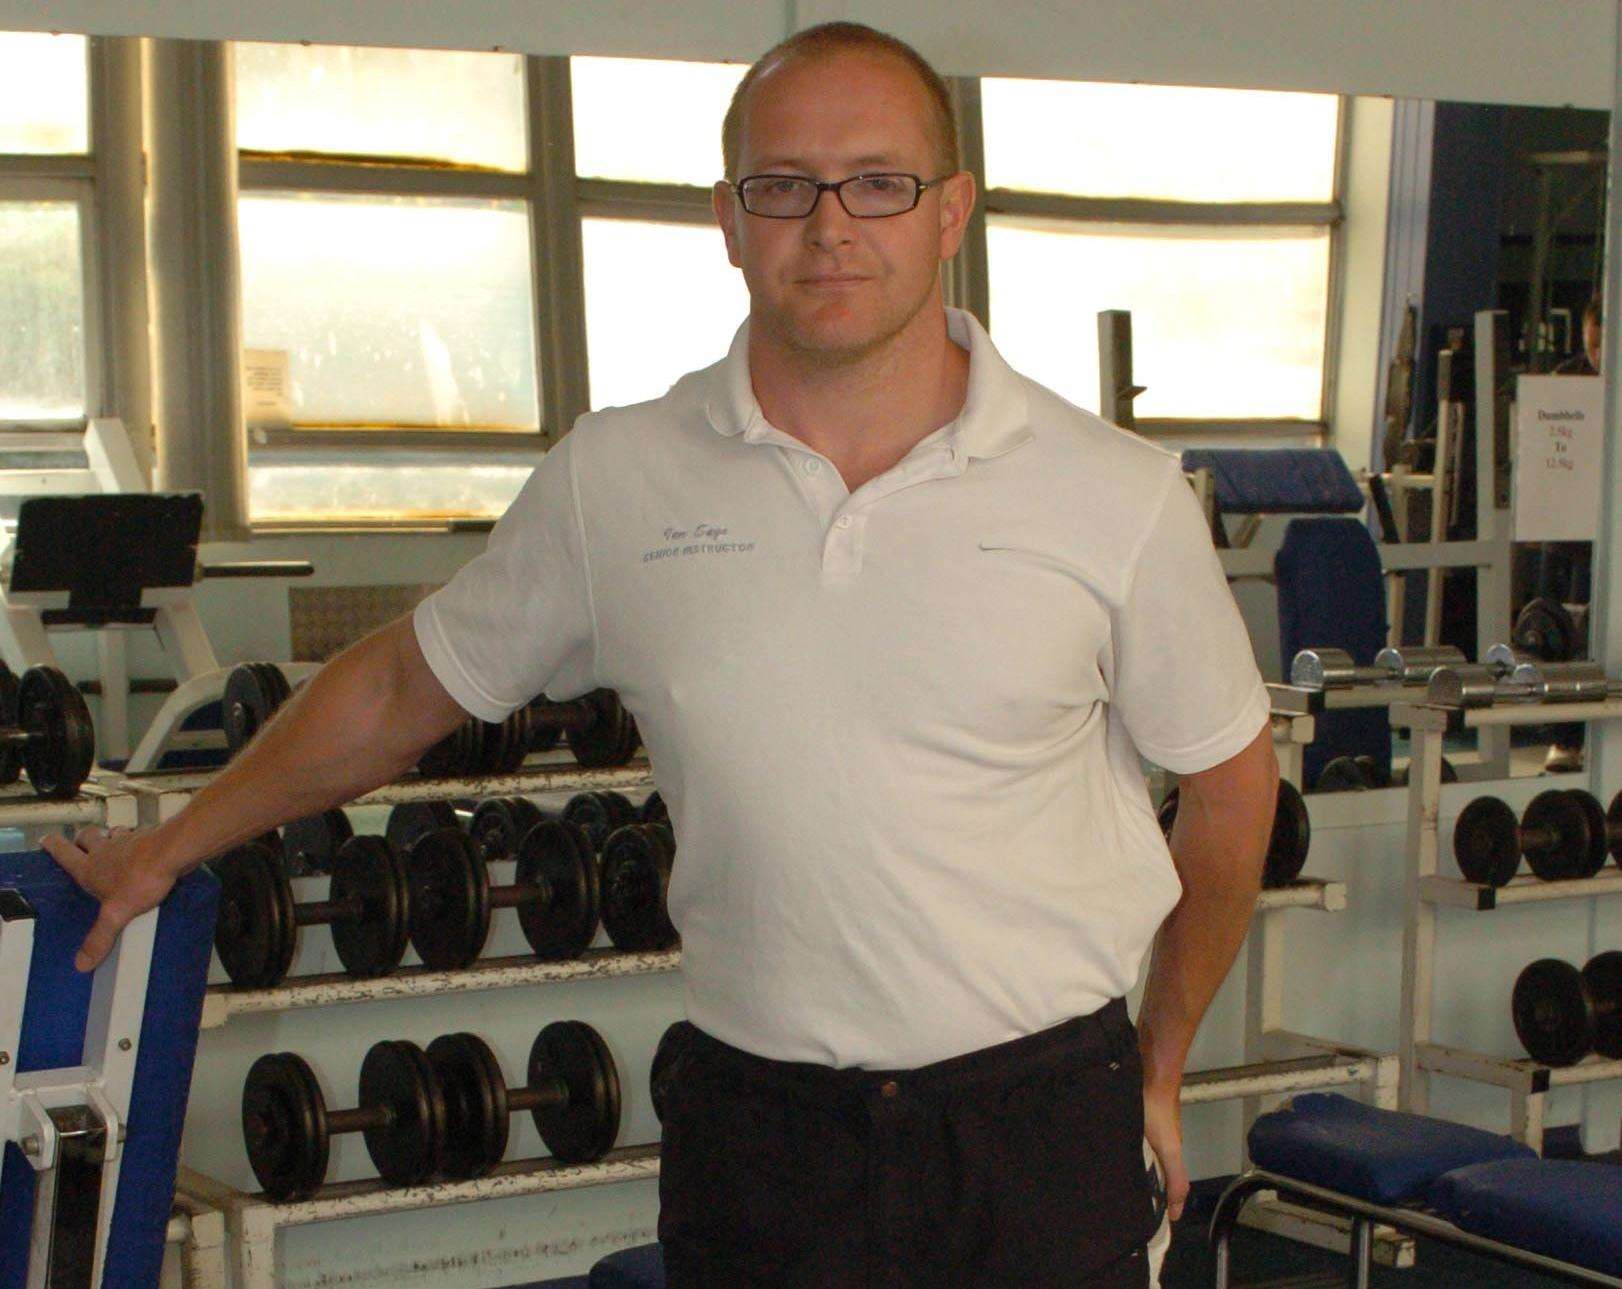 Ian Sage worked in gyms and the fitness industry for 25 years